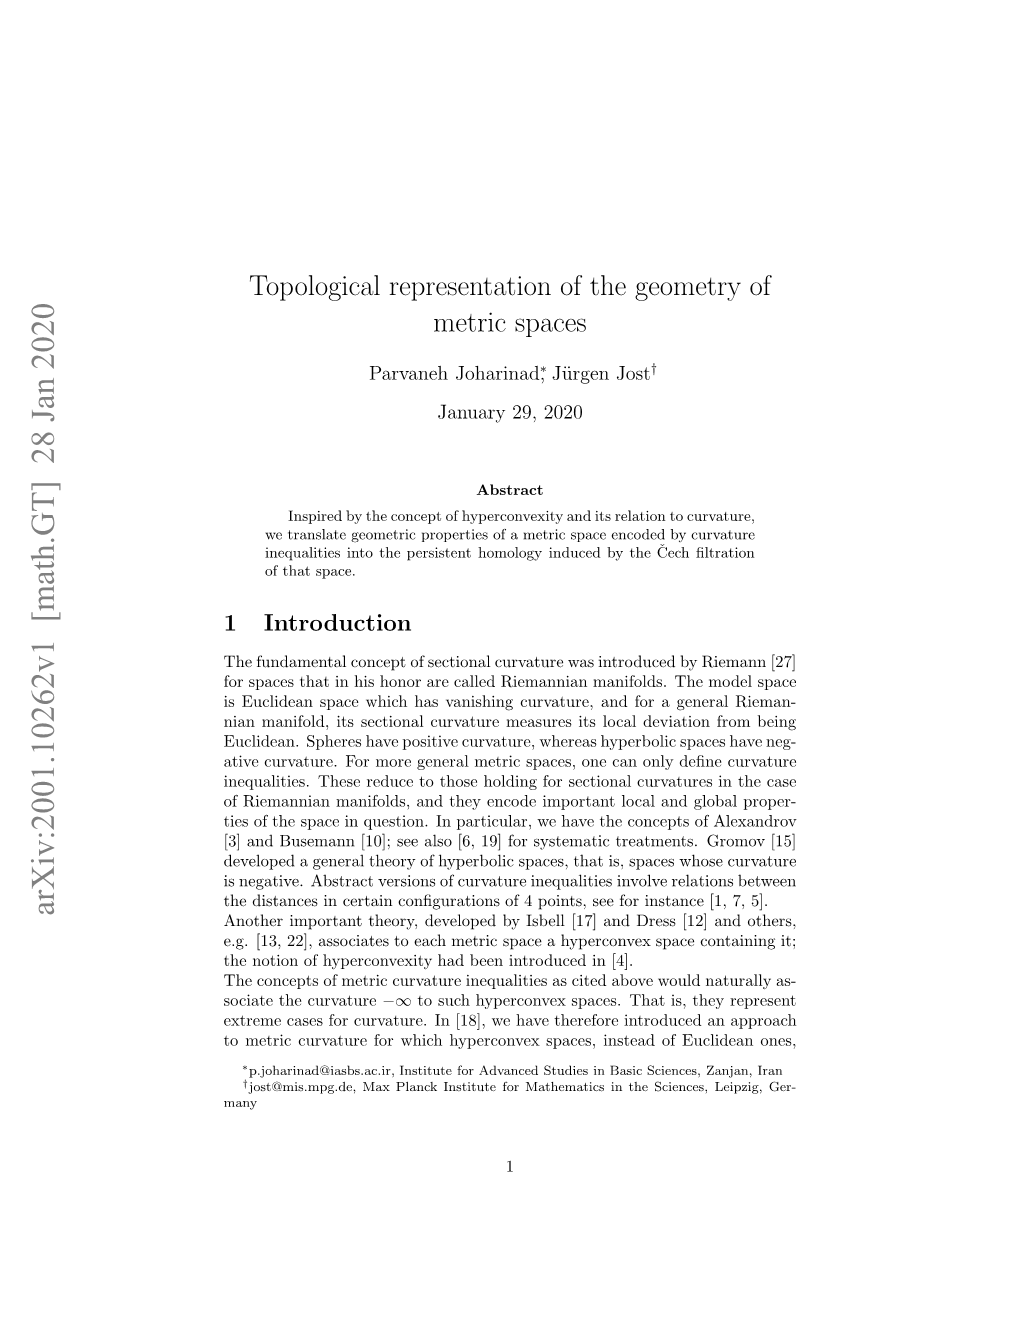 Topological Representation of the Geometry of Metric Spaces